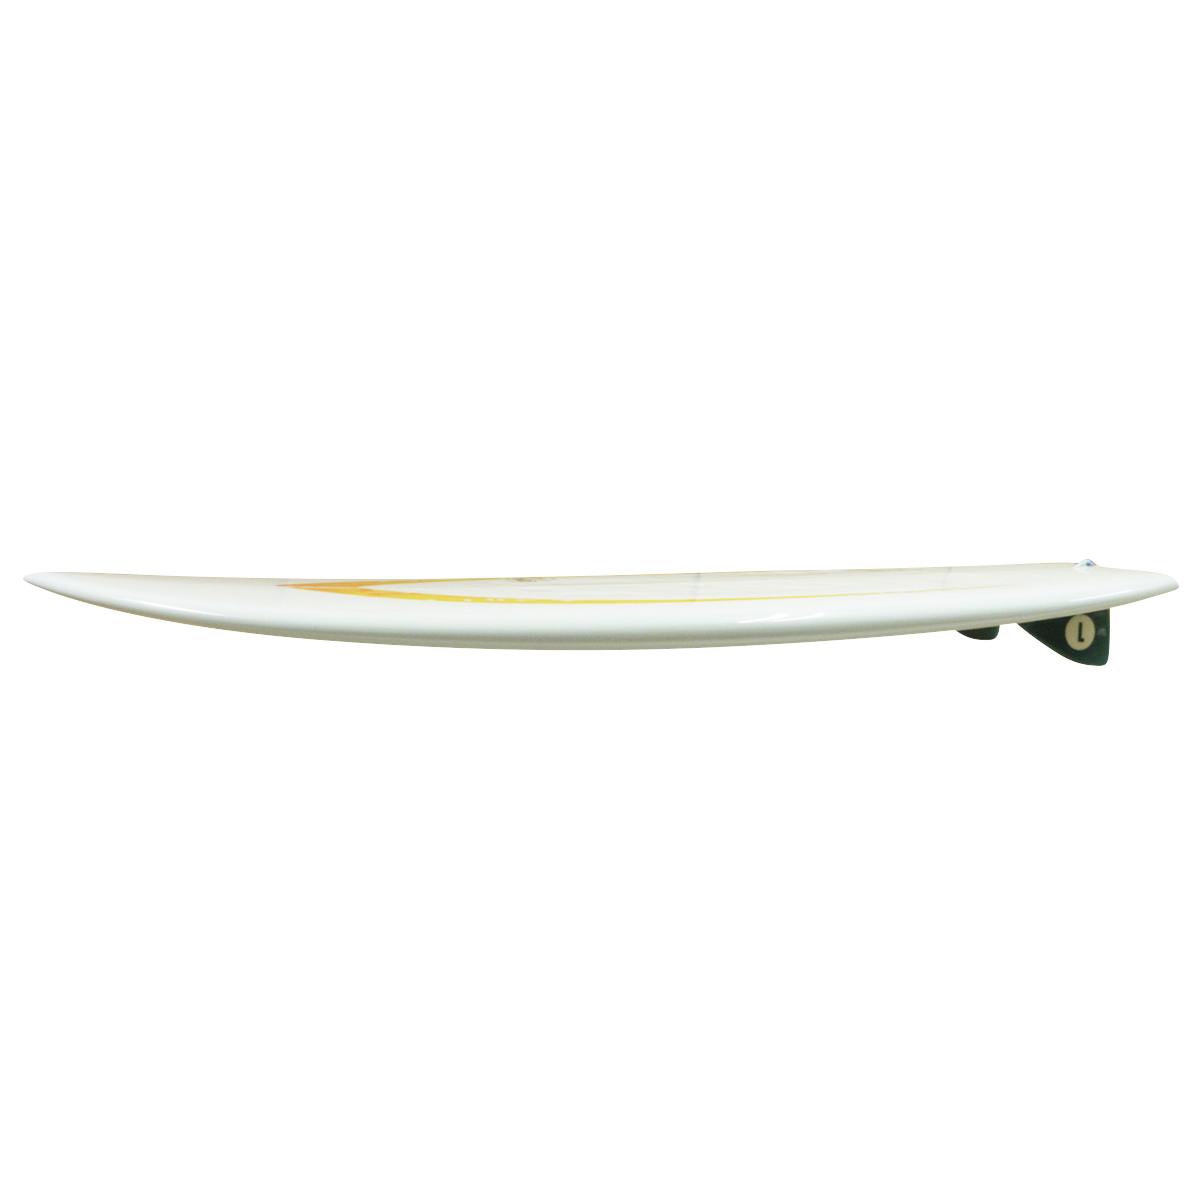 SURF BOARDS ONE / FISH 6`2